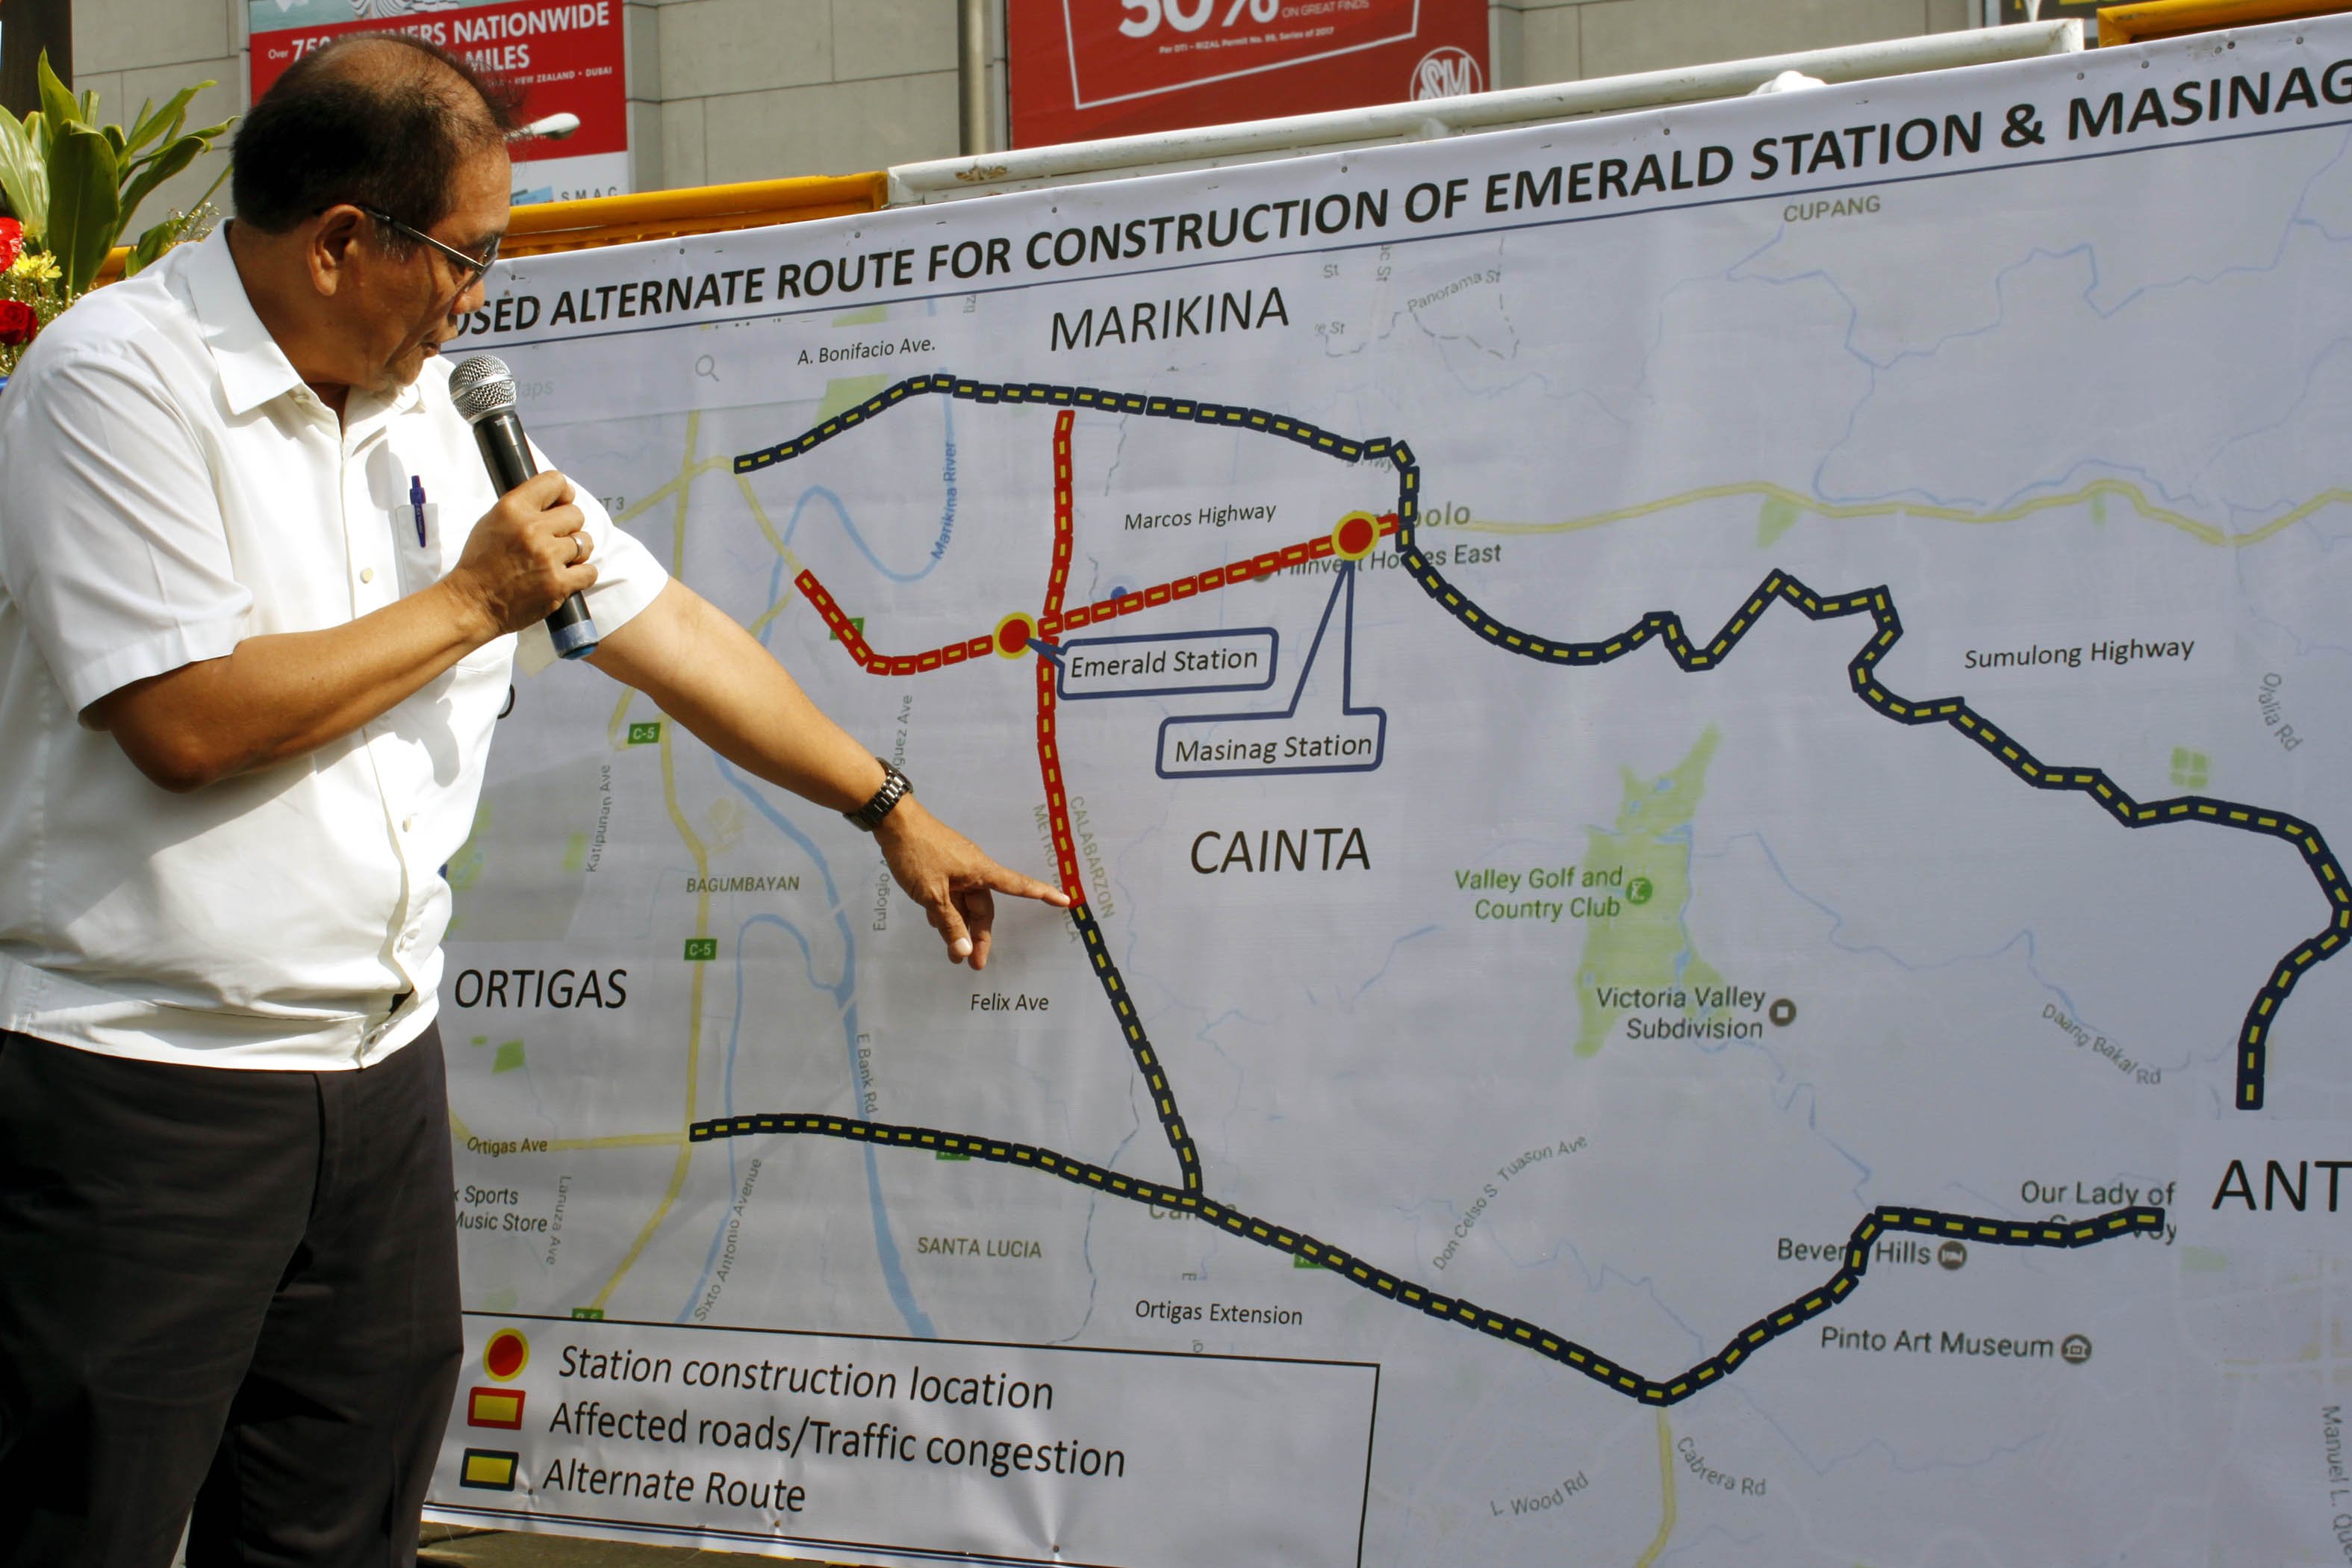 Alternate route during the Construction of of Line-2 East Extension Project Emerald and Masinag Stations